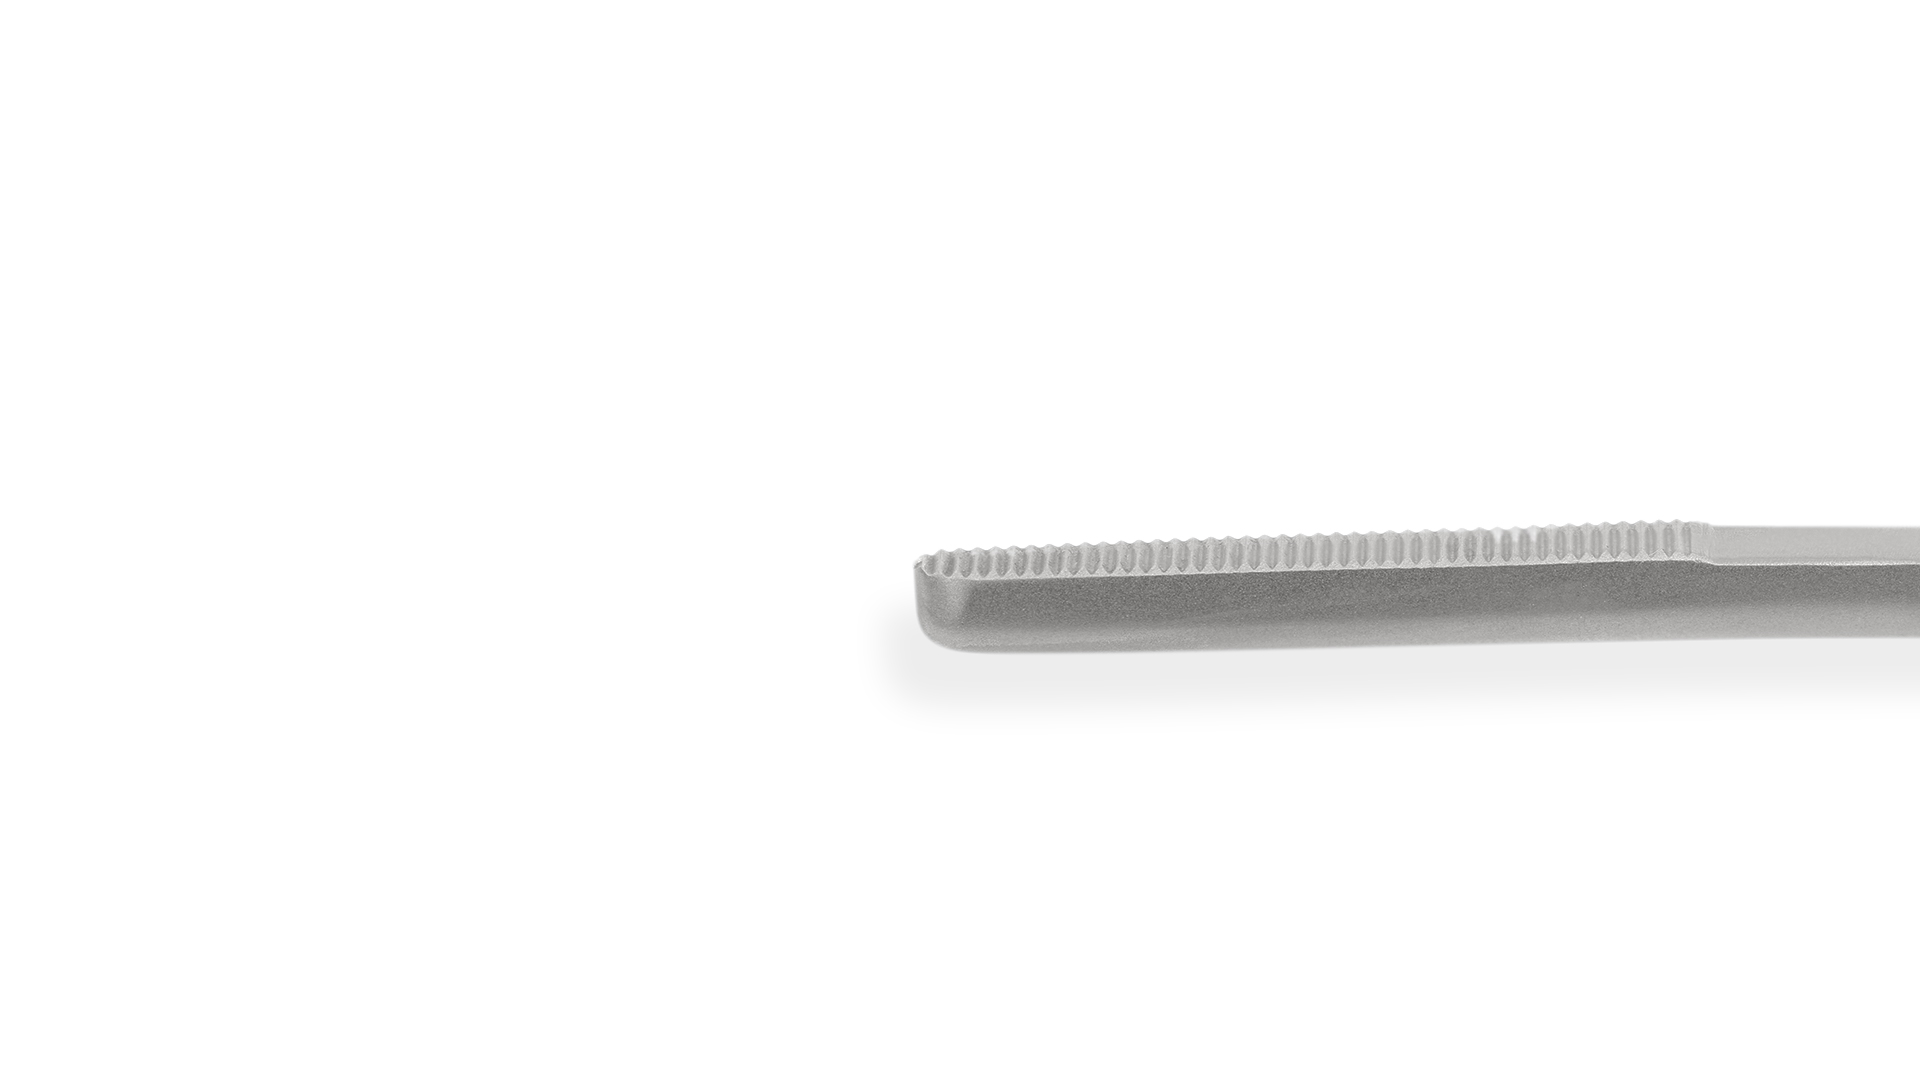 Gerald Forceps - Straight 2mm serrated tips